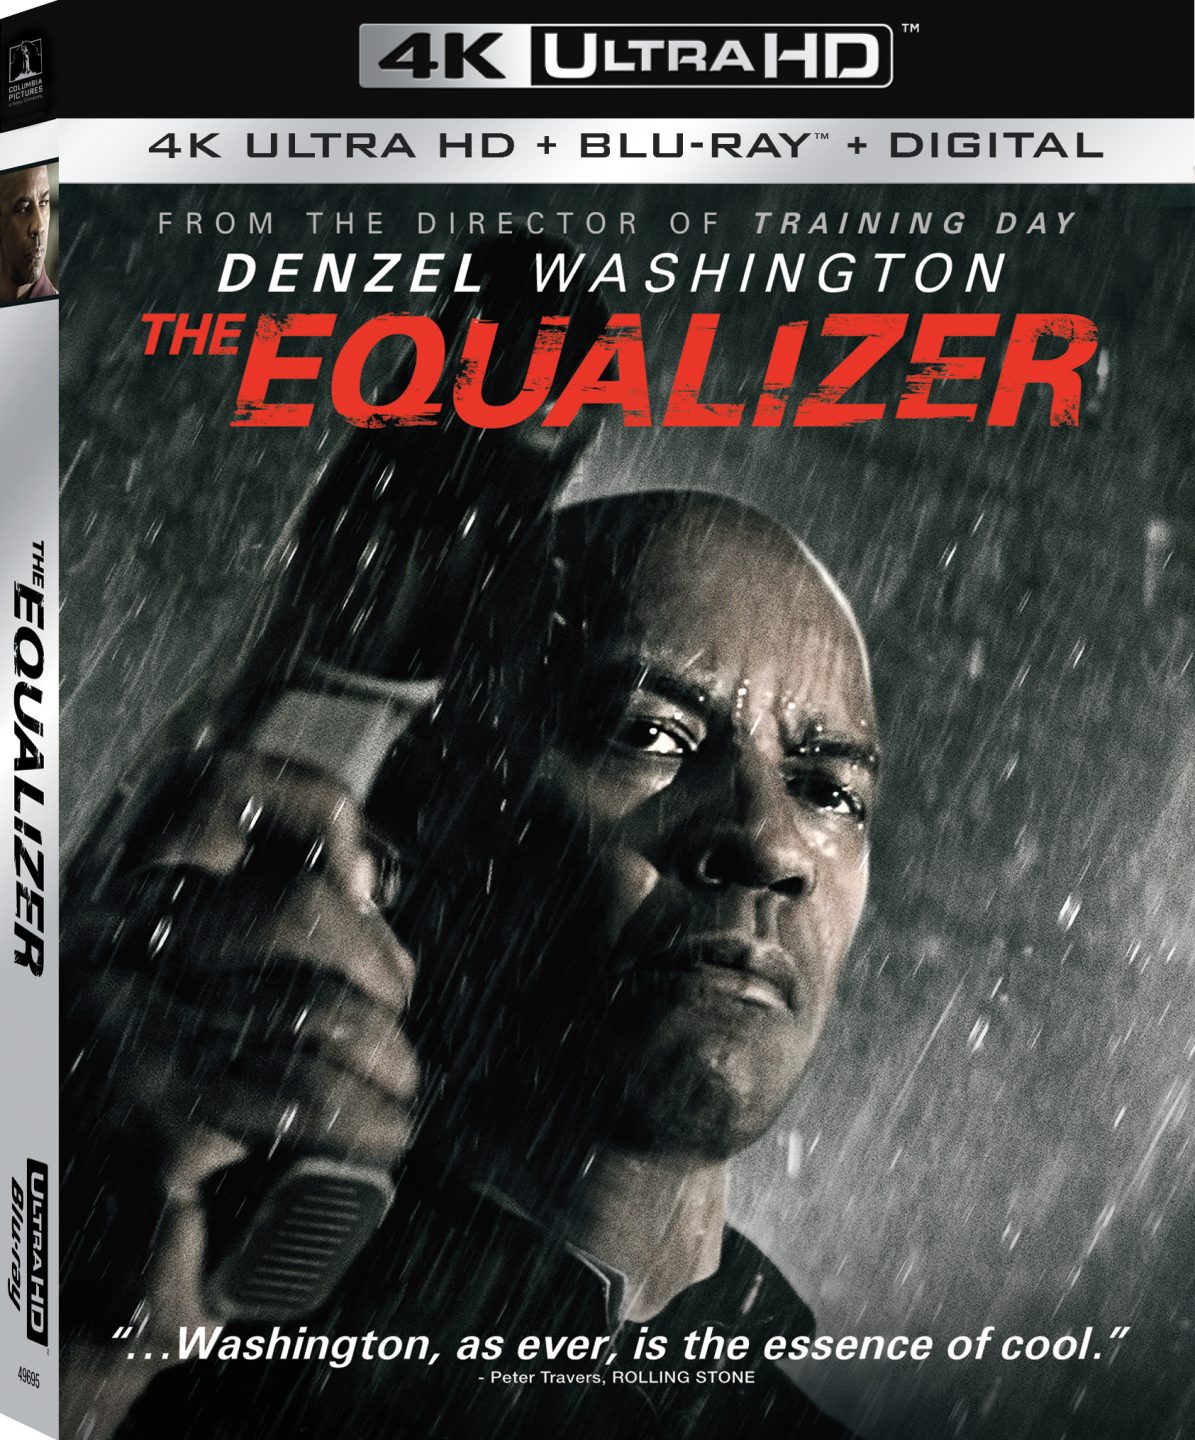 The Equalizer 4K Ultra HD cover (Sony Pictures Home Entertainment)